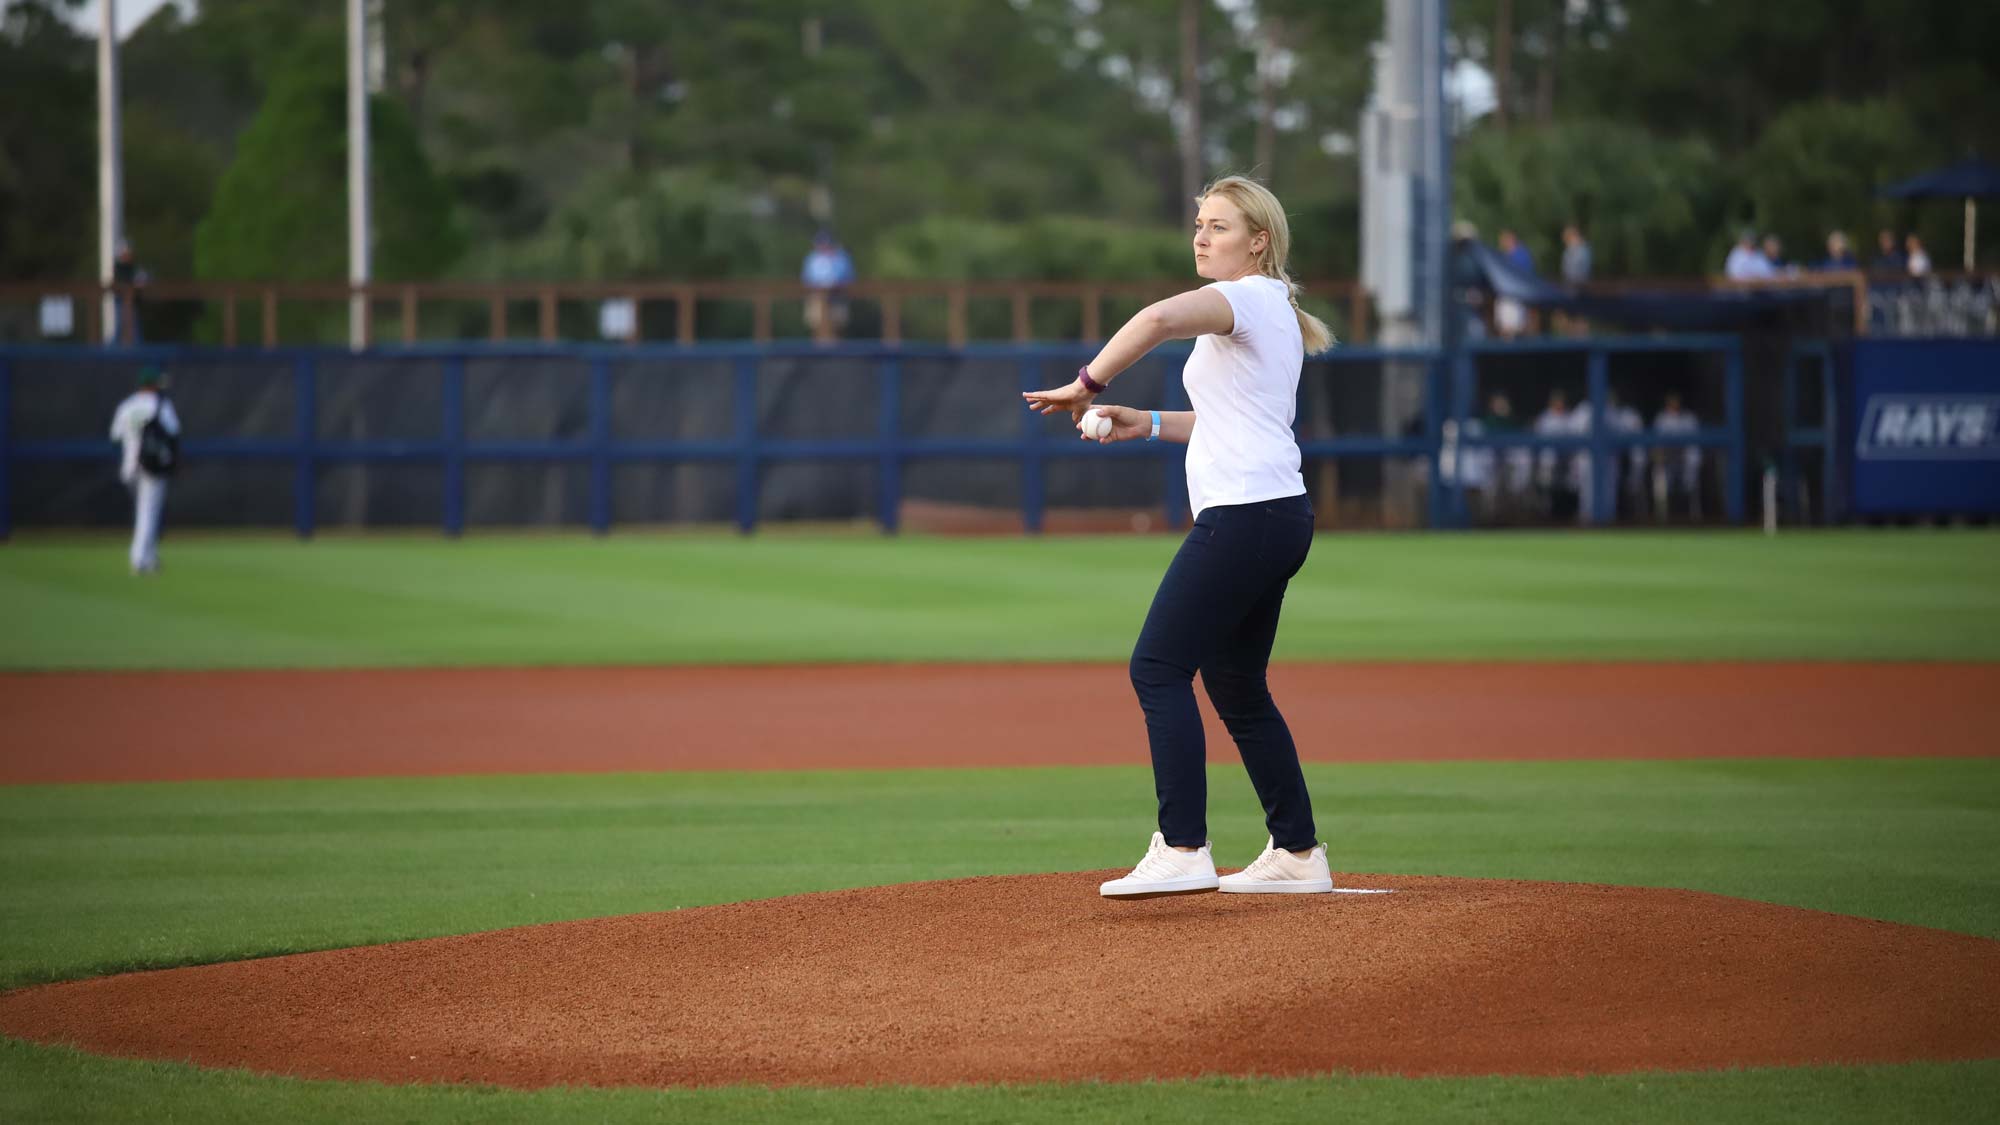 AJ Newell throws first pitch